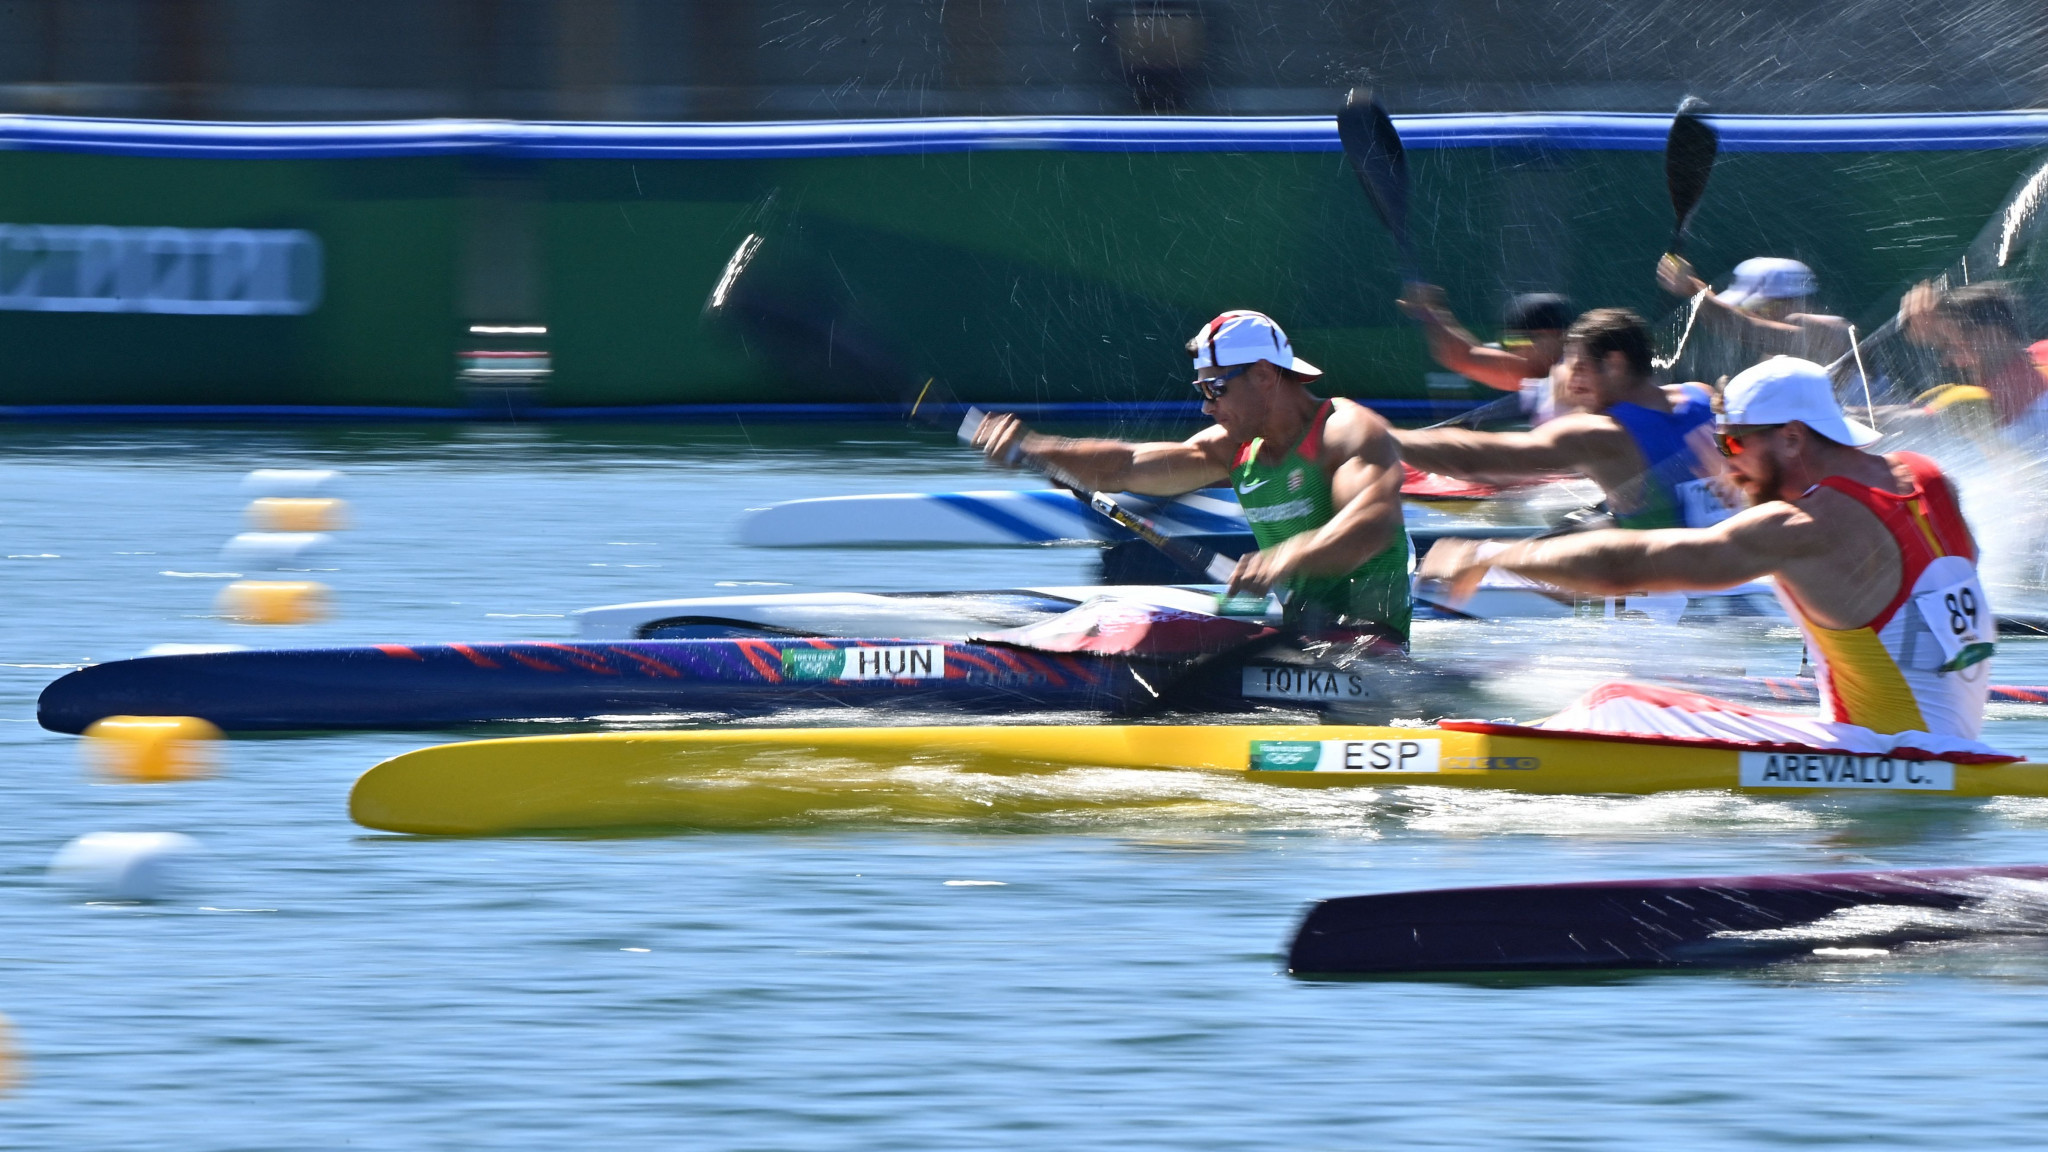 Hungary's Sándor Tótka came out on top in a tense men's K1 200m final ©Getty Images